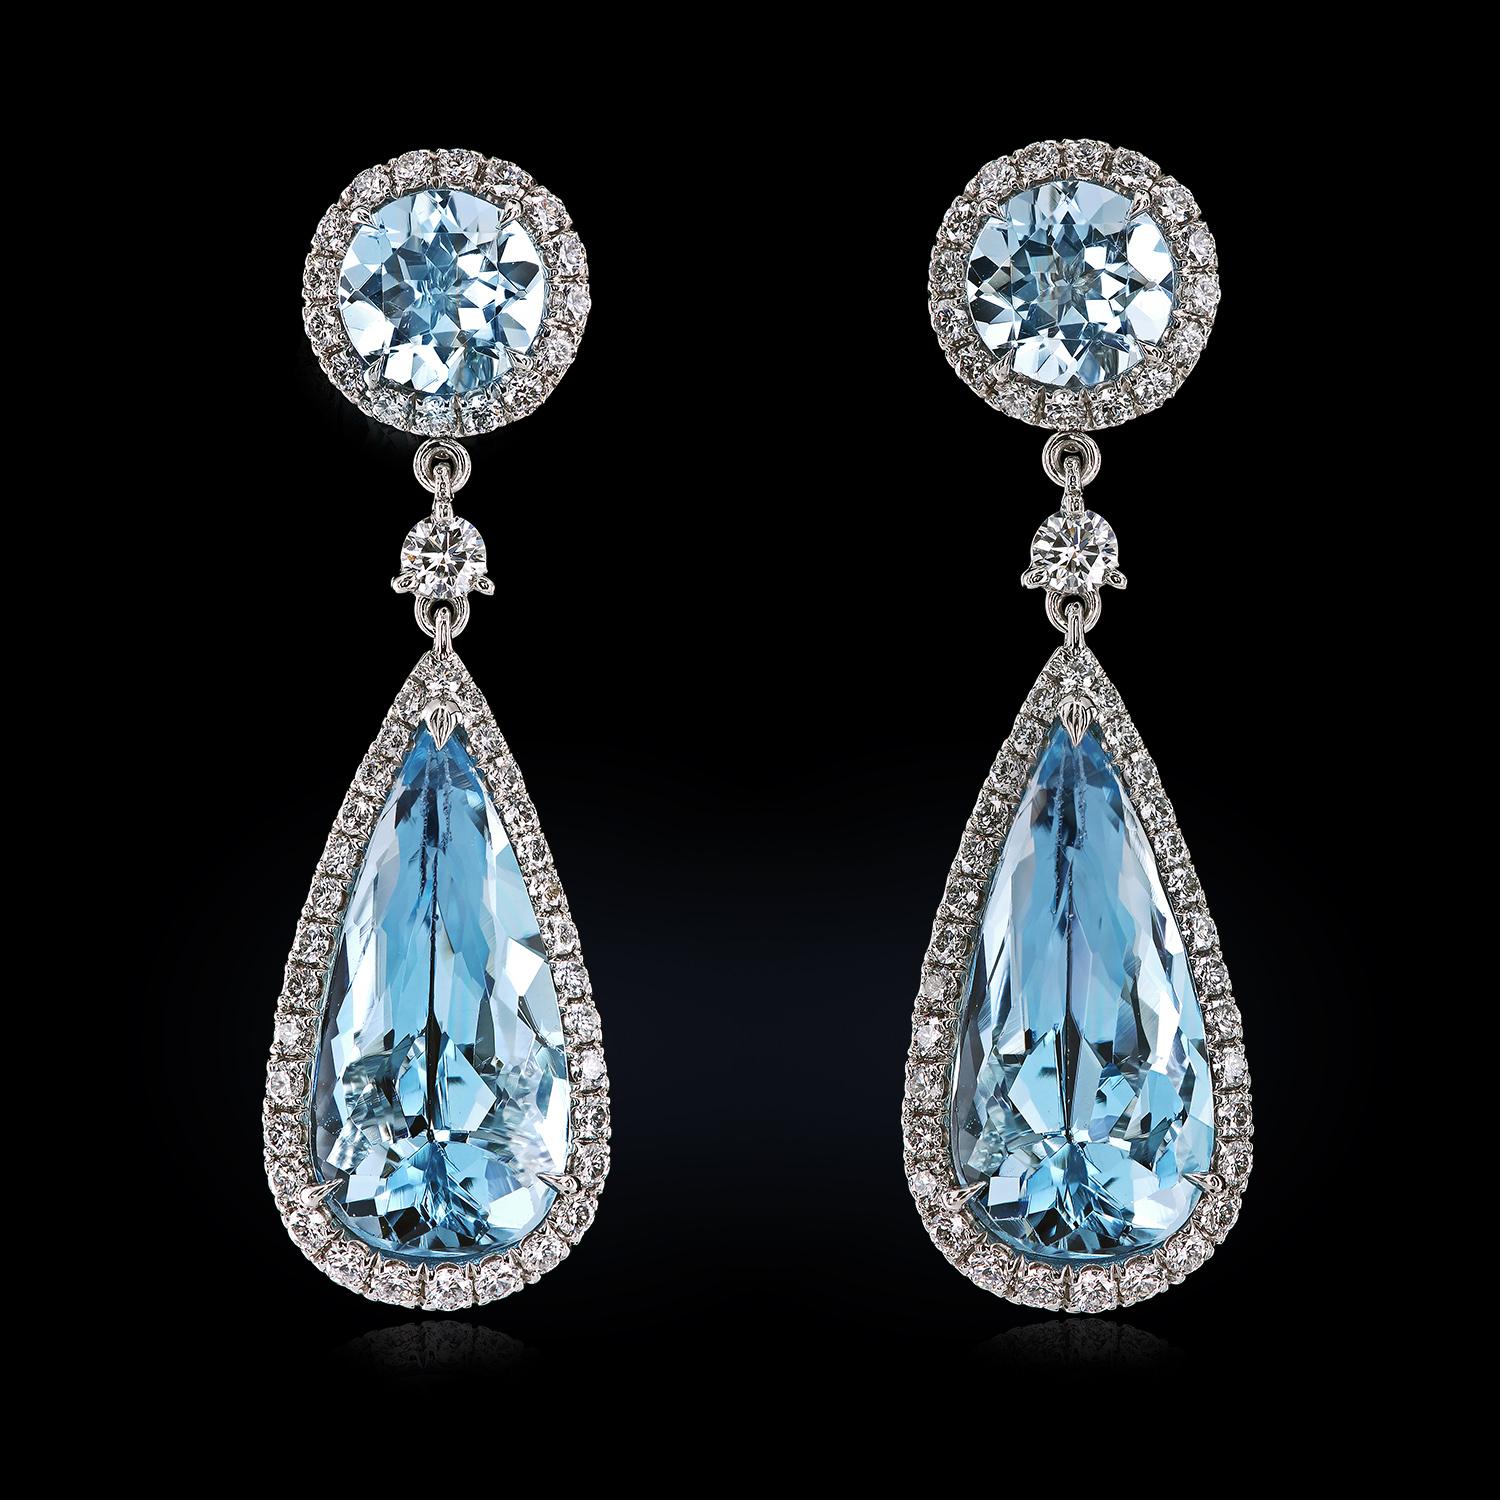 Bespoke earrings featuring 8.13 carats of natural aquamarines and 0.96 carats of finest diamonds. The platinum drops are easy to convert to a pair of studs by sliding the pendants off the post. They can be worn as studs during the day and as